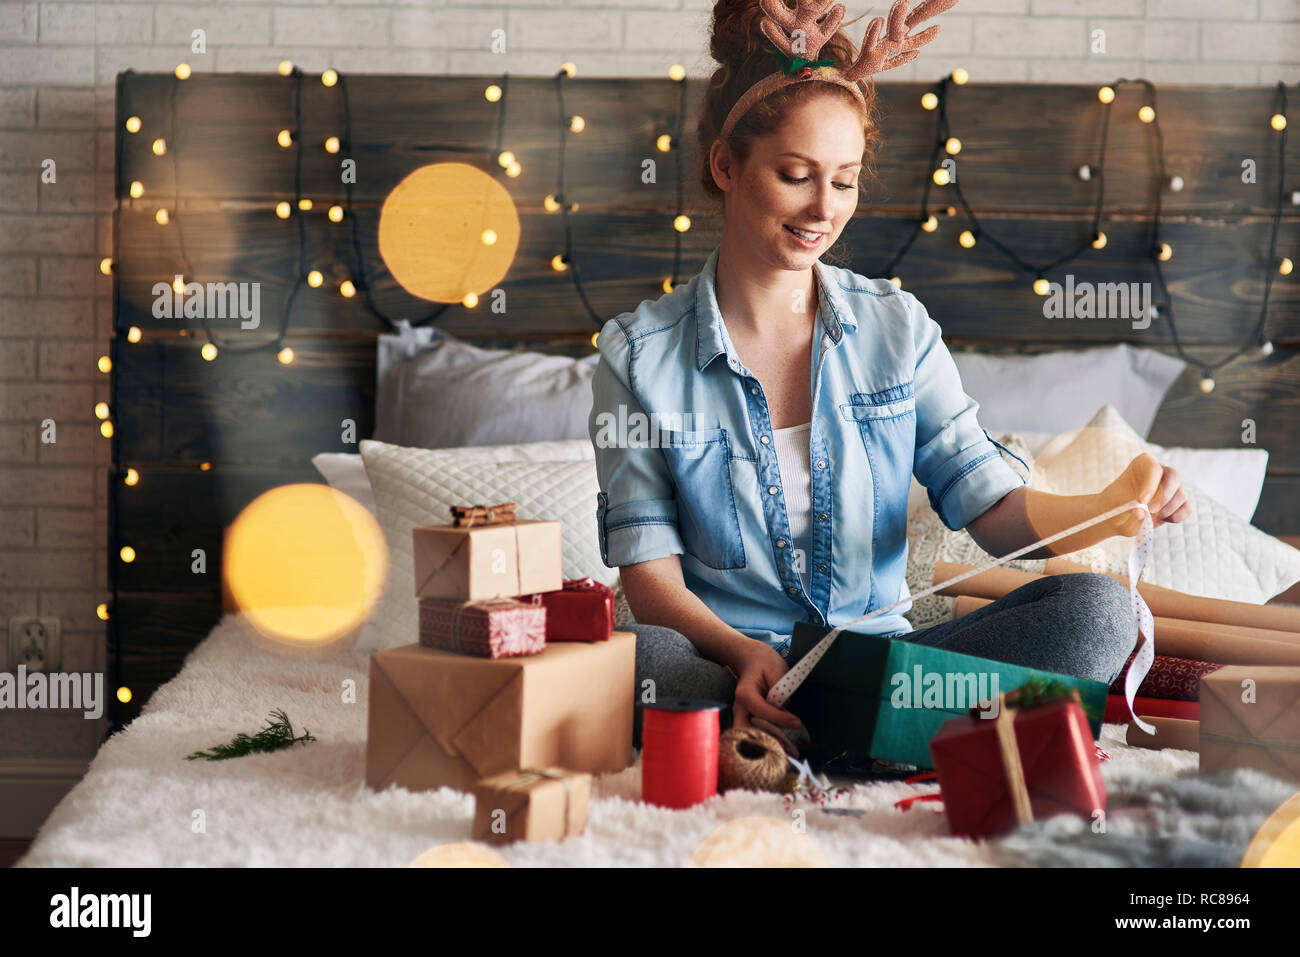 Woman wrapping Christmas presents on bed Stock Photo